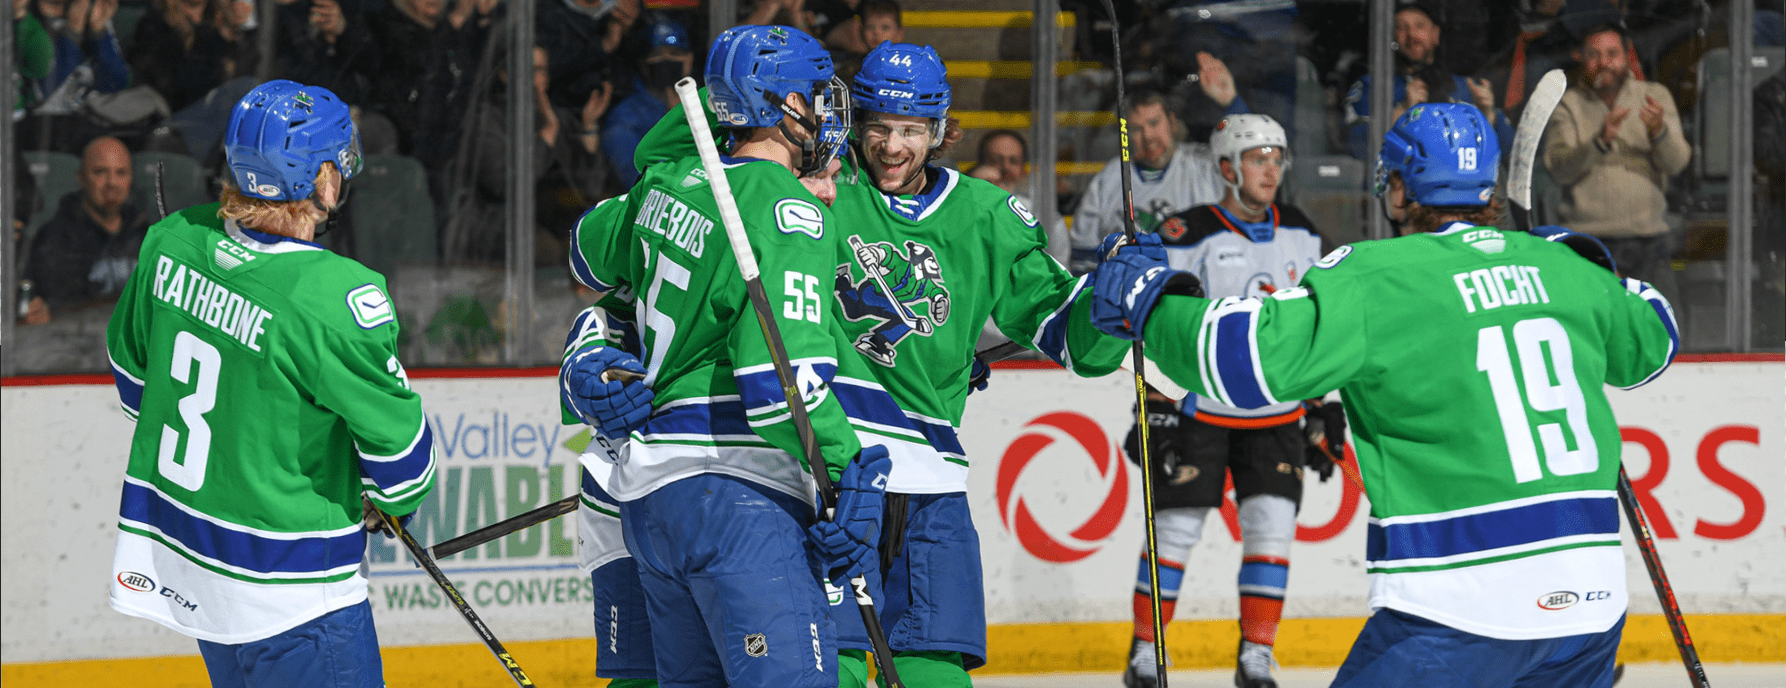 Abbotsford Canucks extend win streak to four games - The Abbotsford News